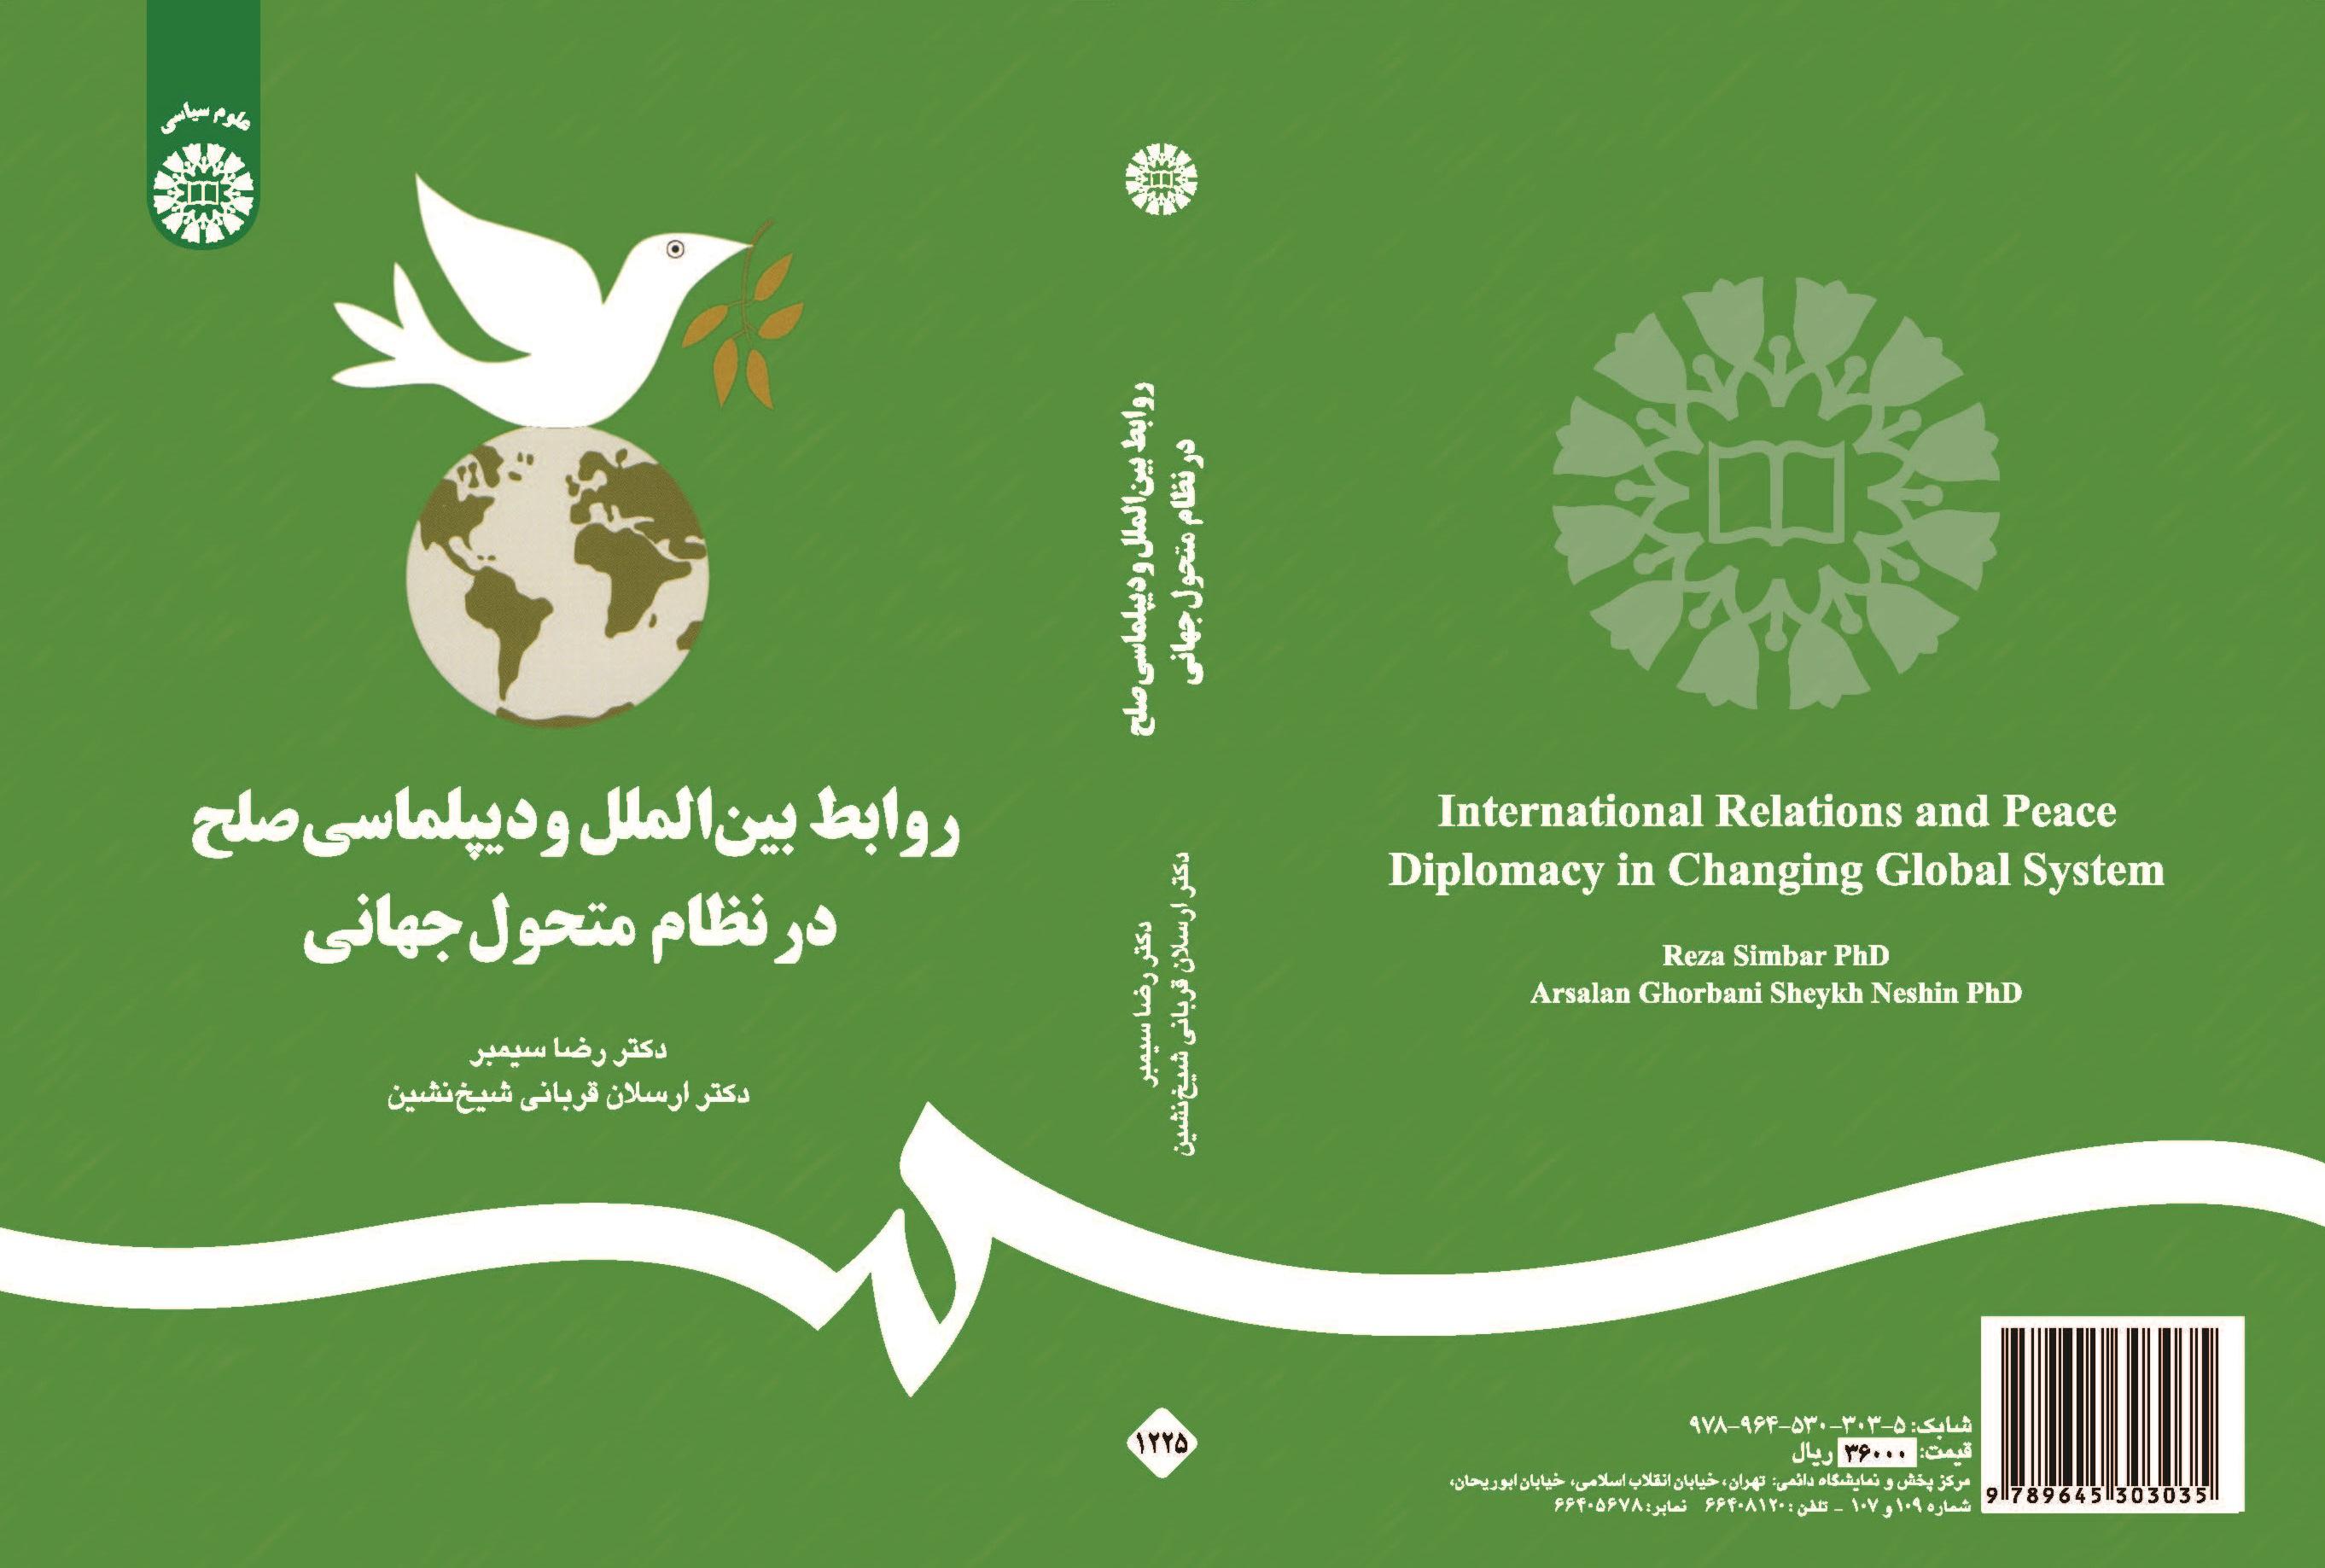 International Relation and Peace Diplomacy in Changing Global System